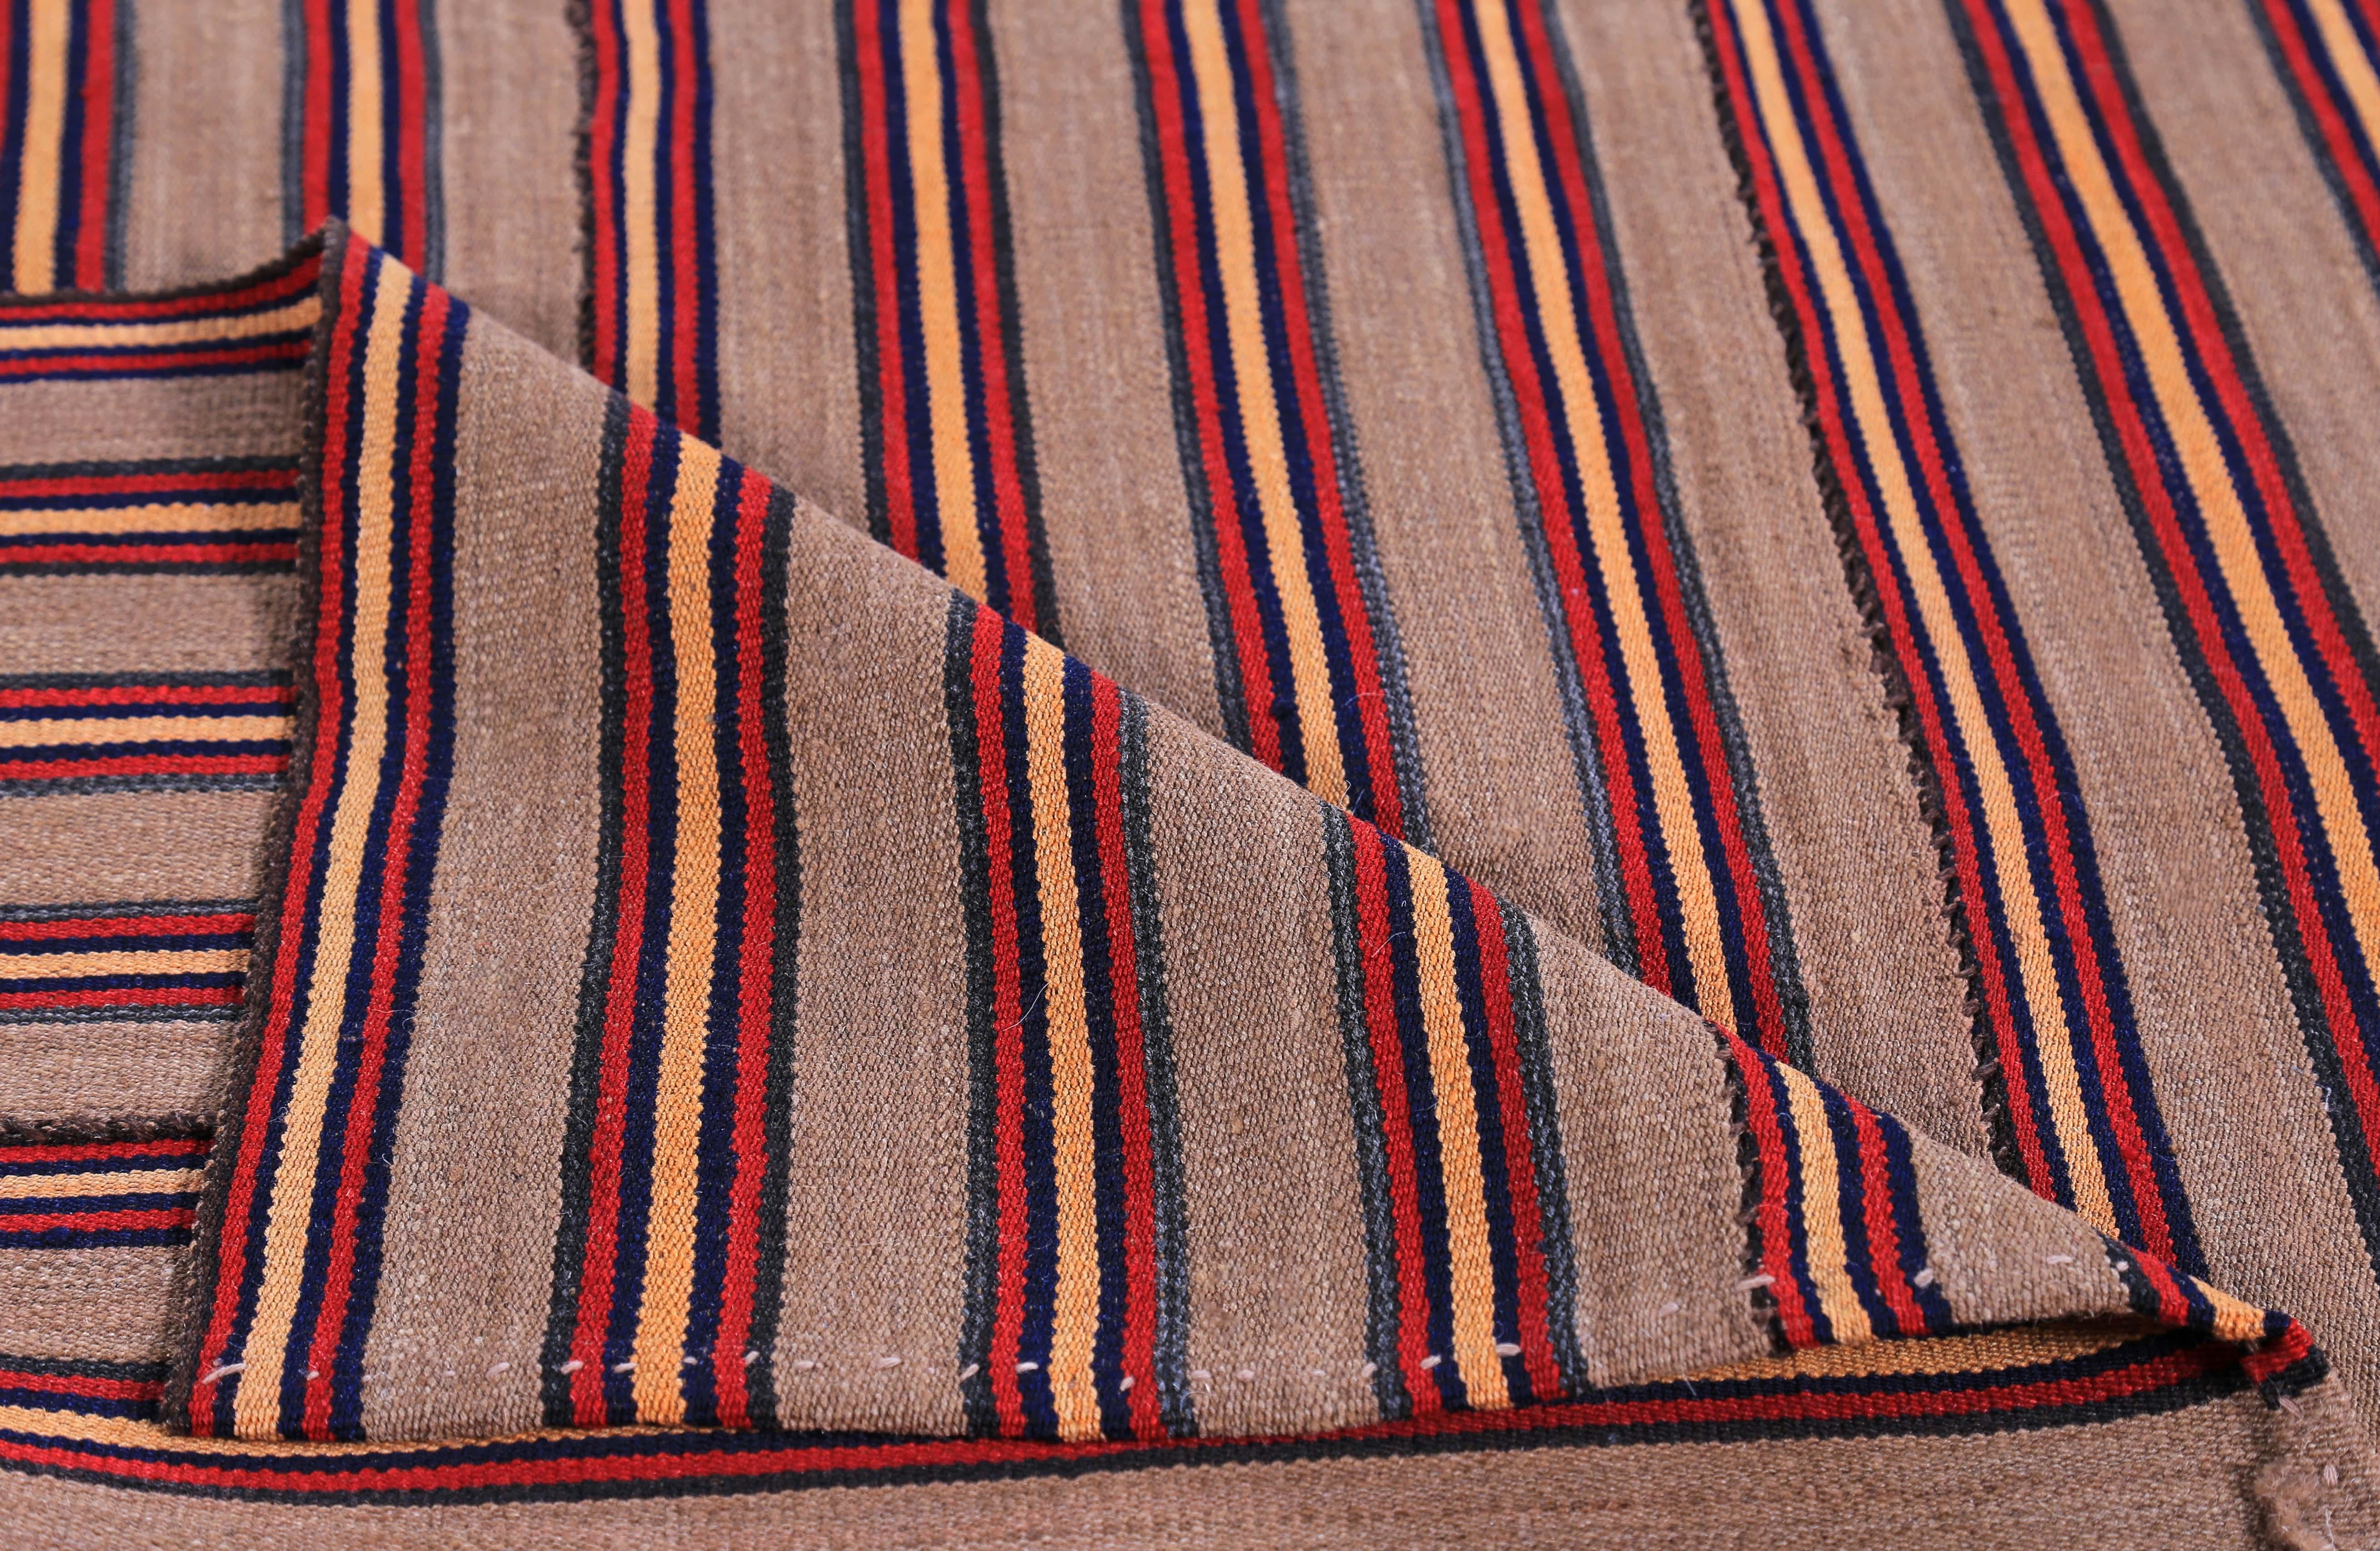 Hand-Woven Modern Turkish Kilim Rug with Red, Orange & Black Pencil Stripes in Beige Field For Sale